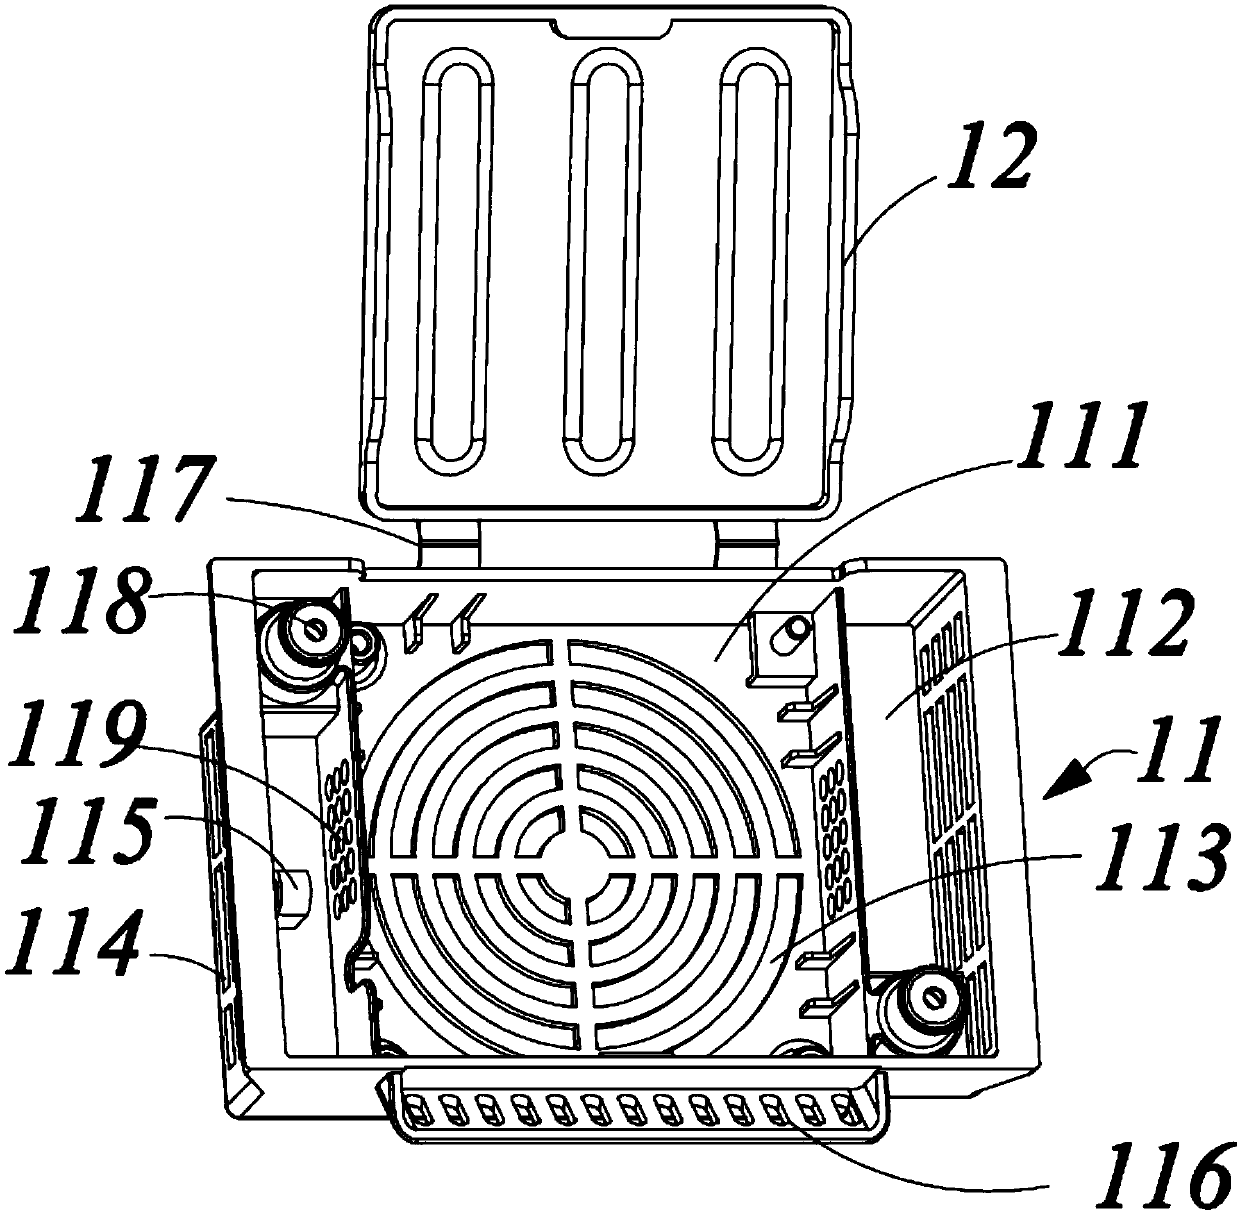 Integrated fan assembly